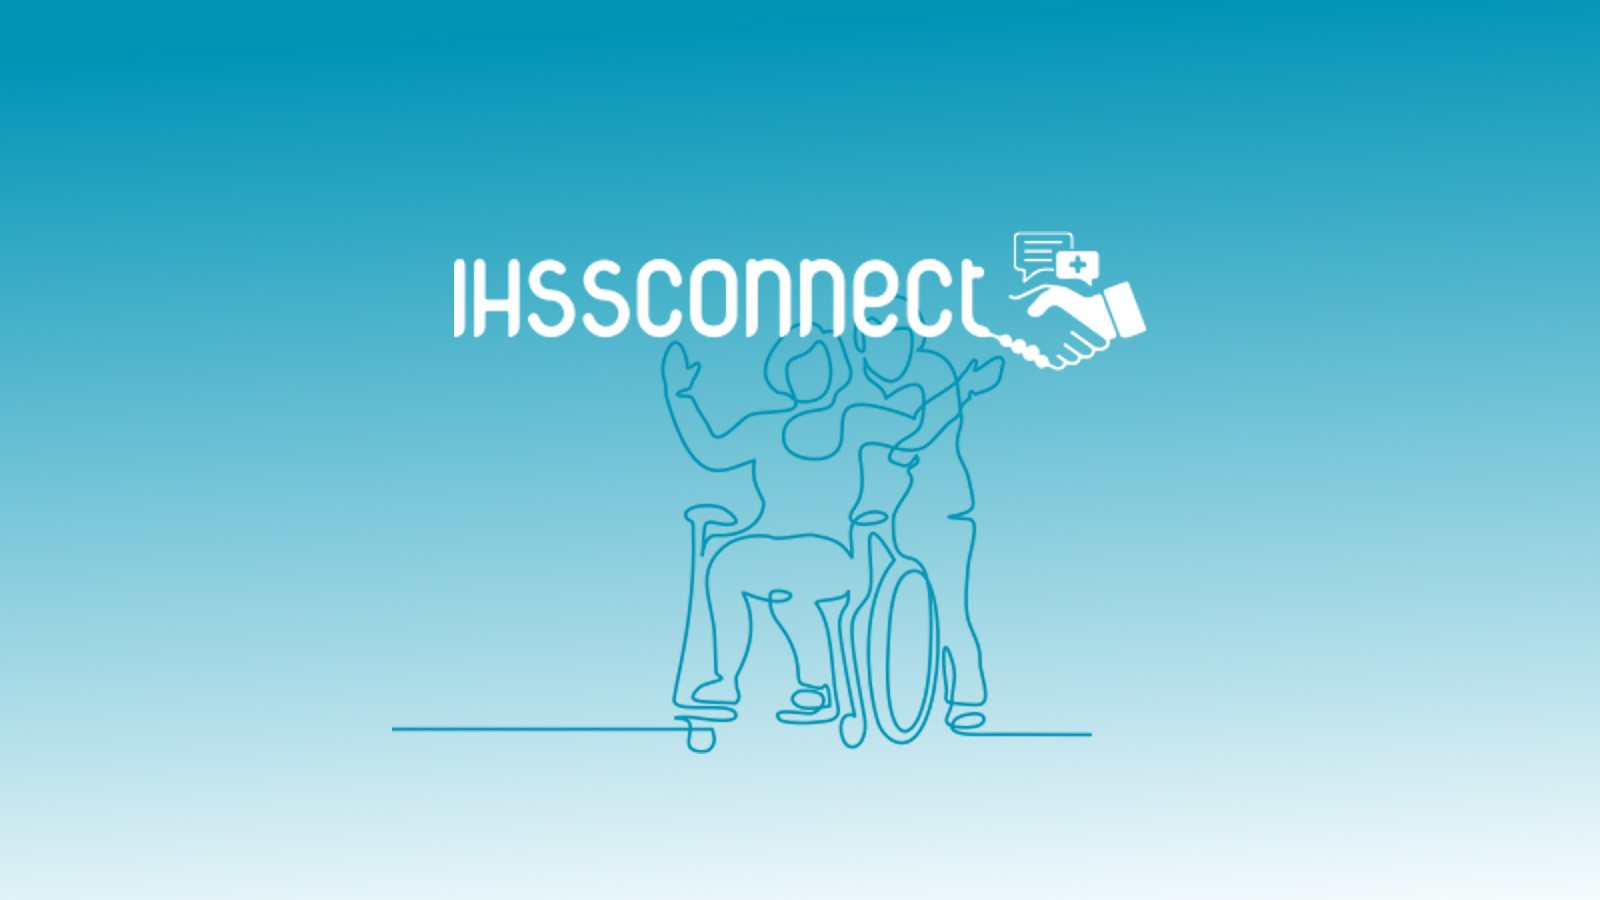 CobbleWeb lauches IHSSconnect, a peer-to-peer healthcare marketplace